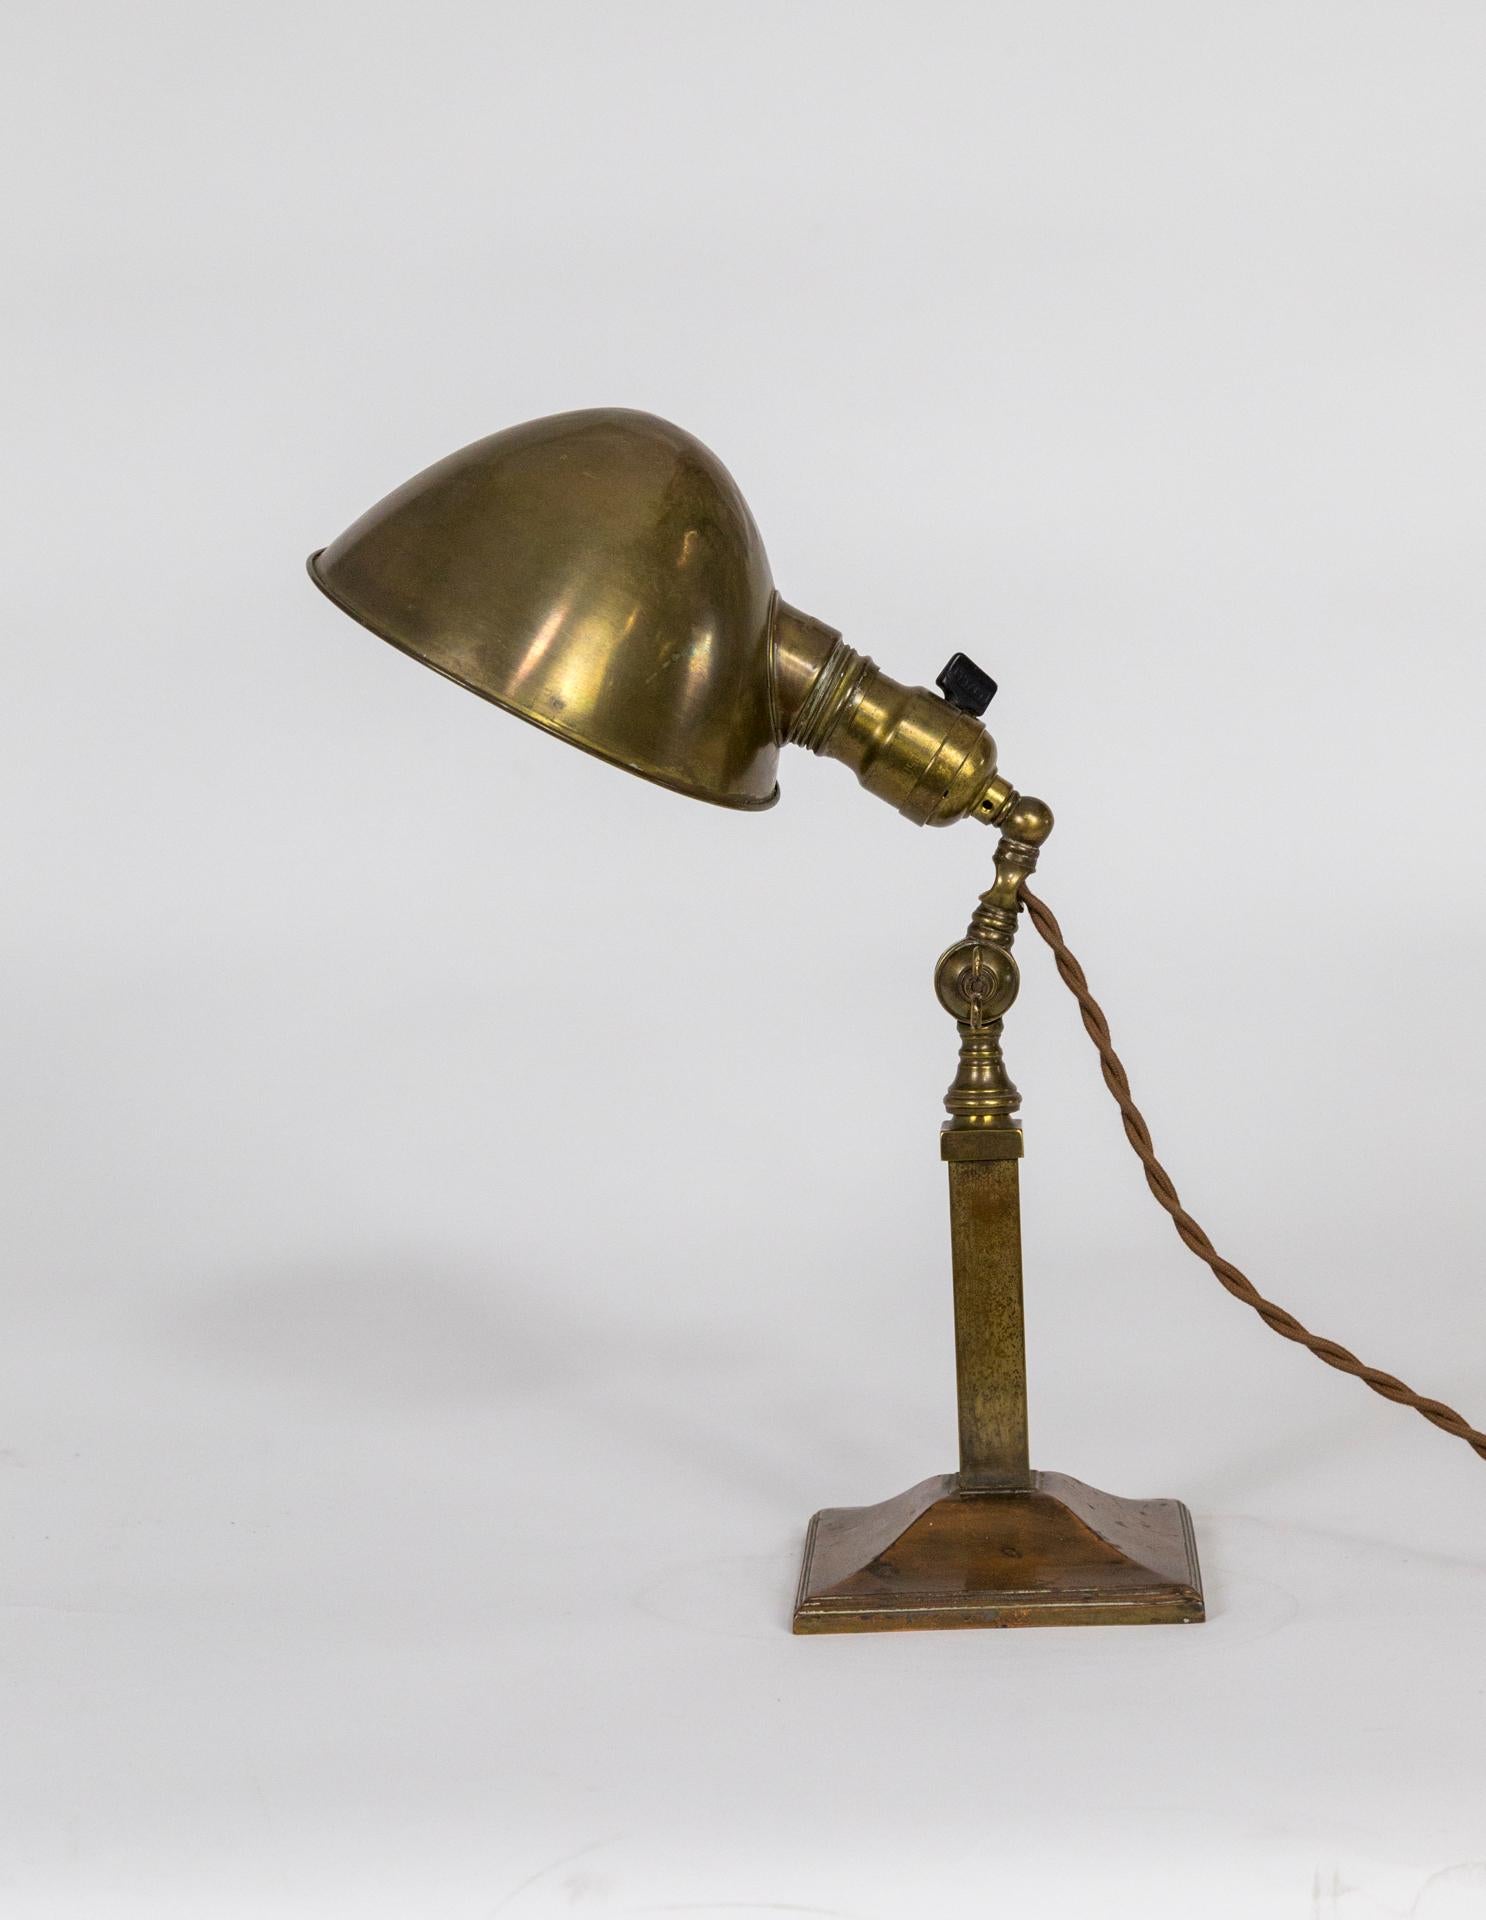 Arts & Crafts style, adjustable Pharmacy desk lamp in patinated brass and copper, with clamshell shade, and square pyramid base. A lovely work of turn of the 20th century Hubbell craftsmanship. With a Bryant socket, newly wired with brown,